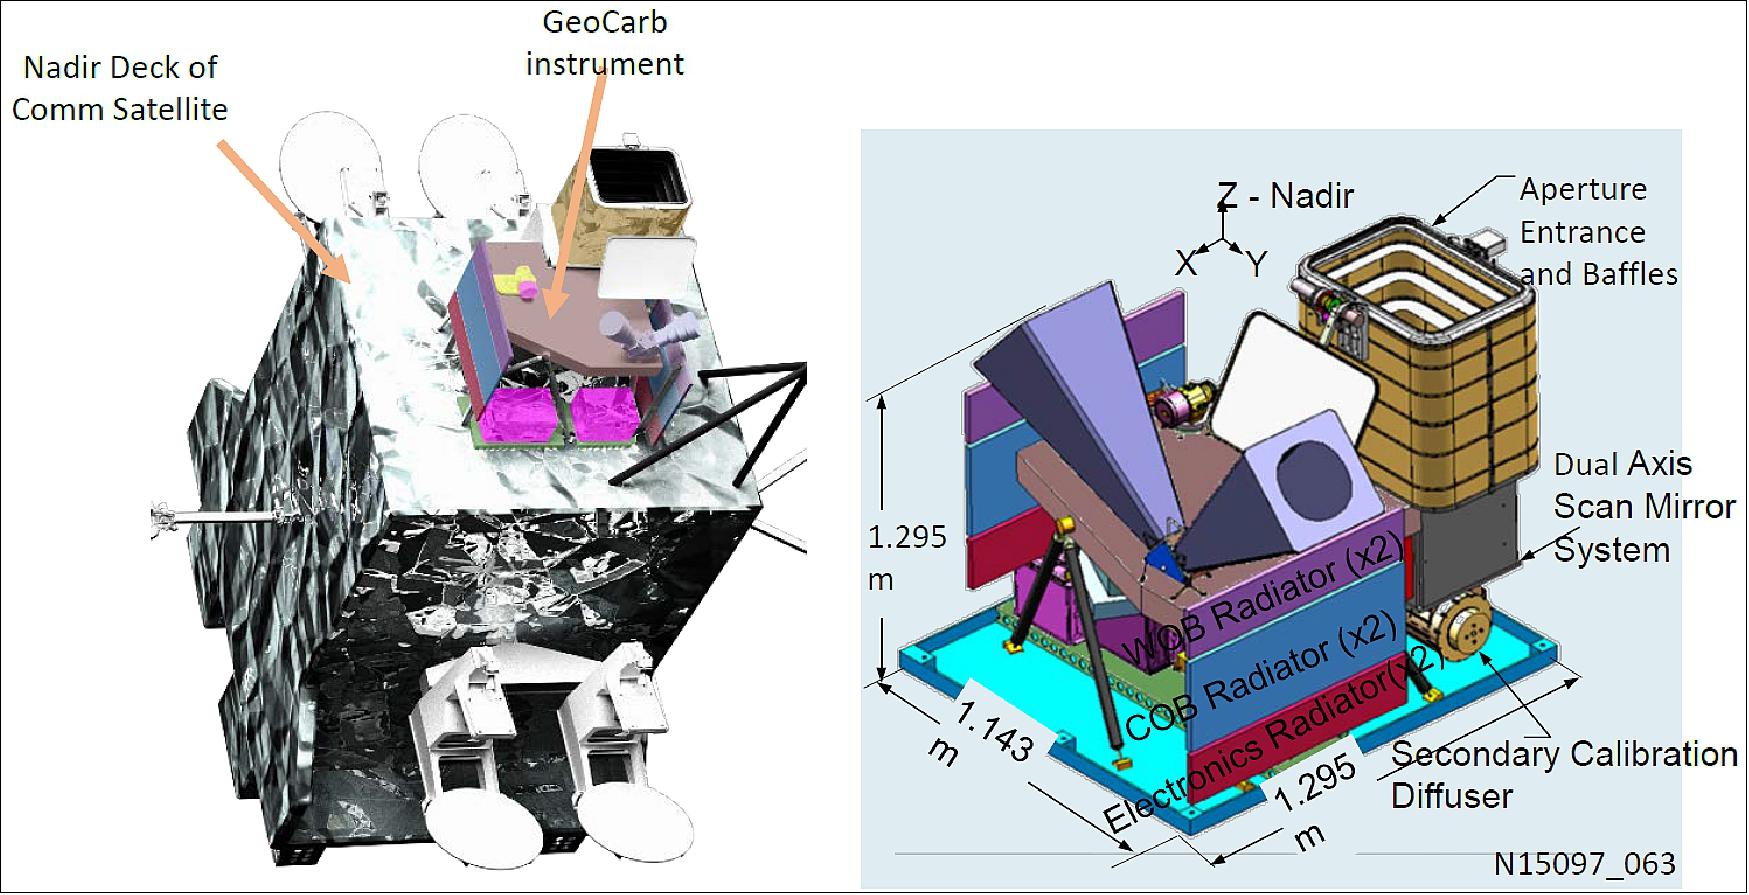 Figure 4: Left: Illustration of the GeoCarb on the spacecraft; Right: schematic view of the GeoCarb instrument (image credit: GeoCarb Team)